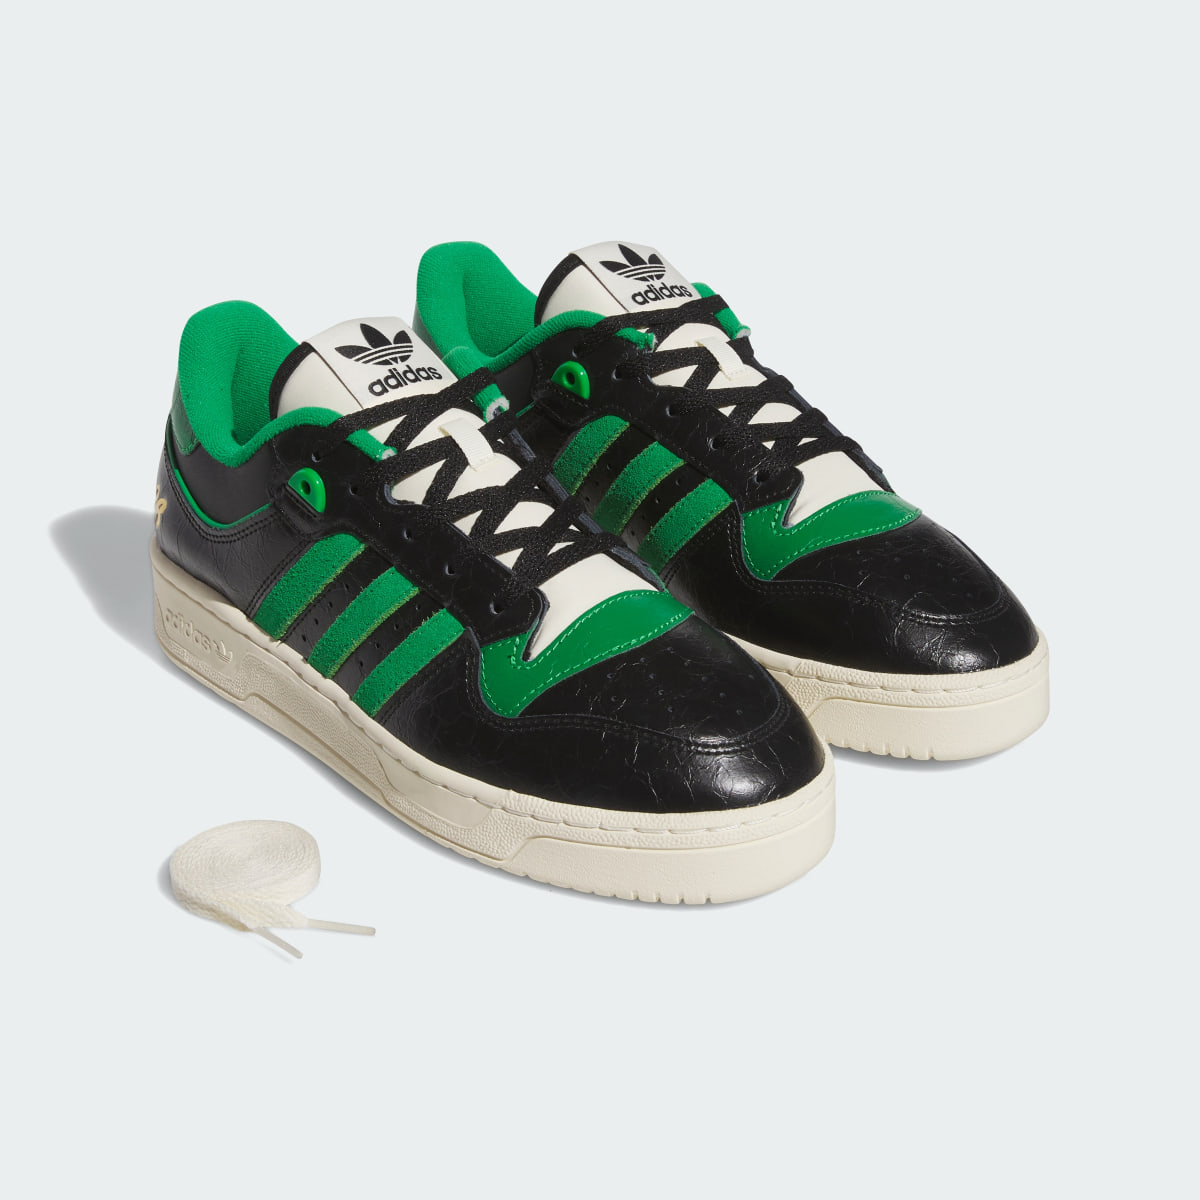 Adidas Rivalry 86 Low Shoes. 10